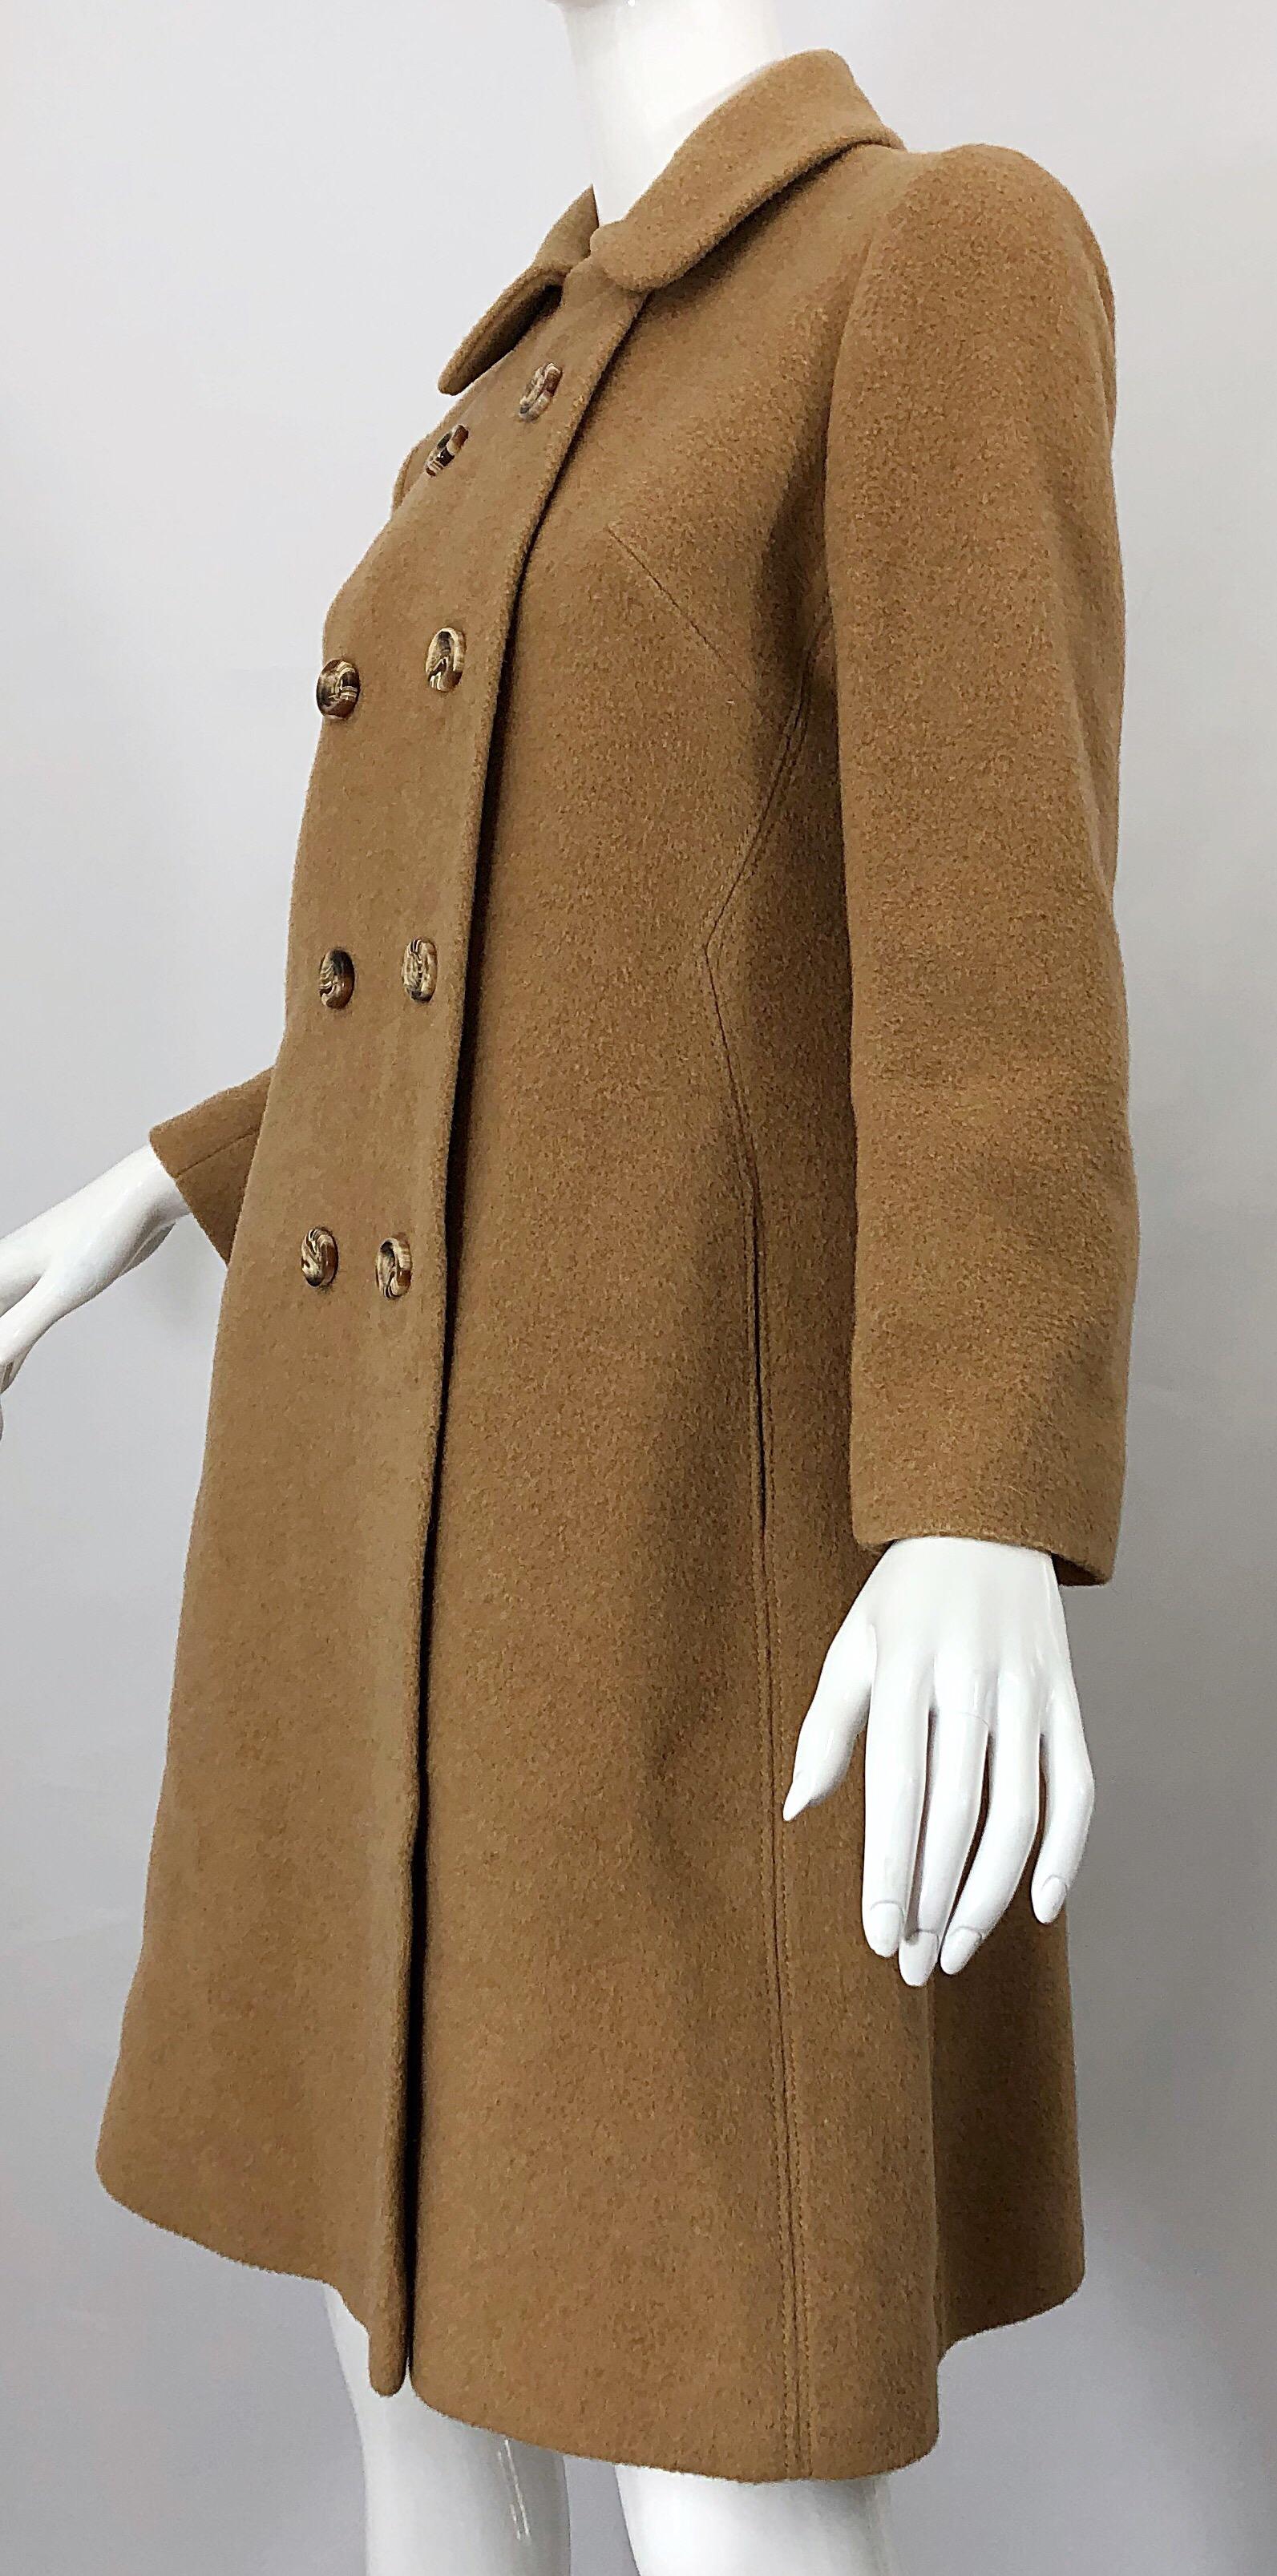 Chic 1960s Camel Tan Camels Hair Wool Double Breasted Vintage Swing Jacket Coat 7